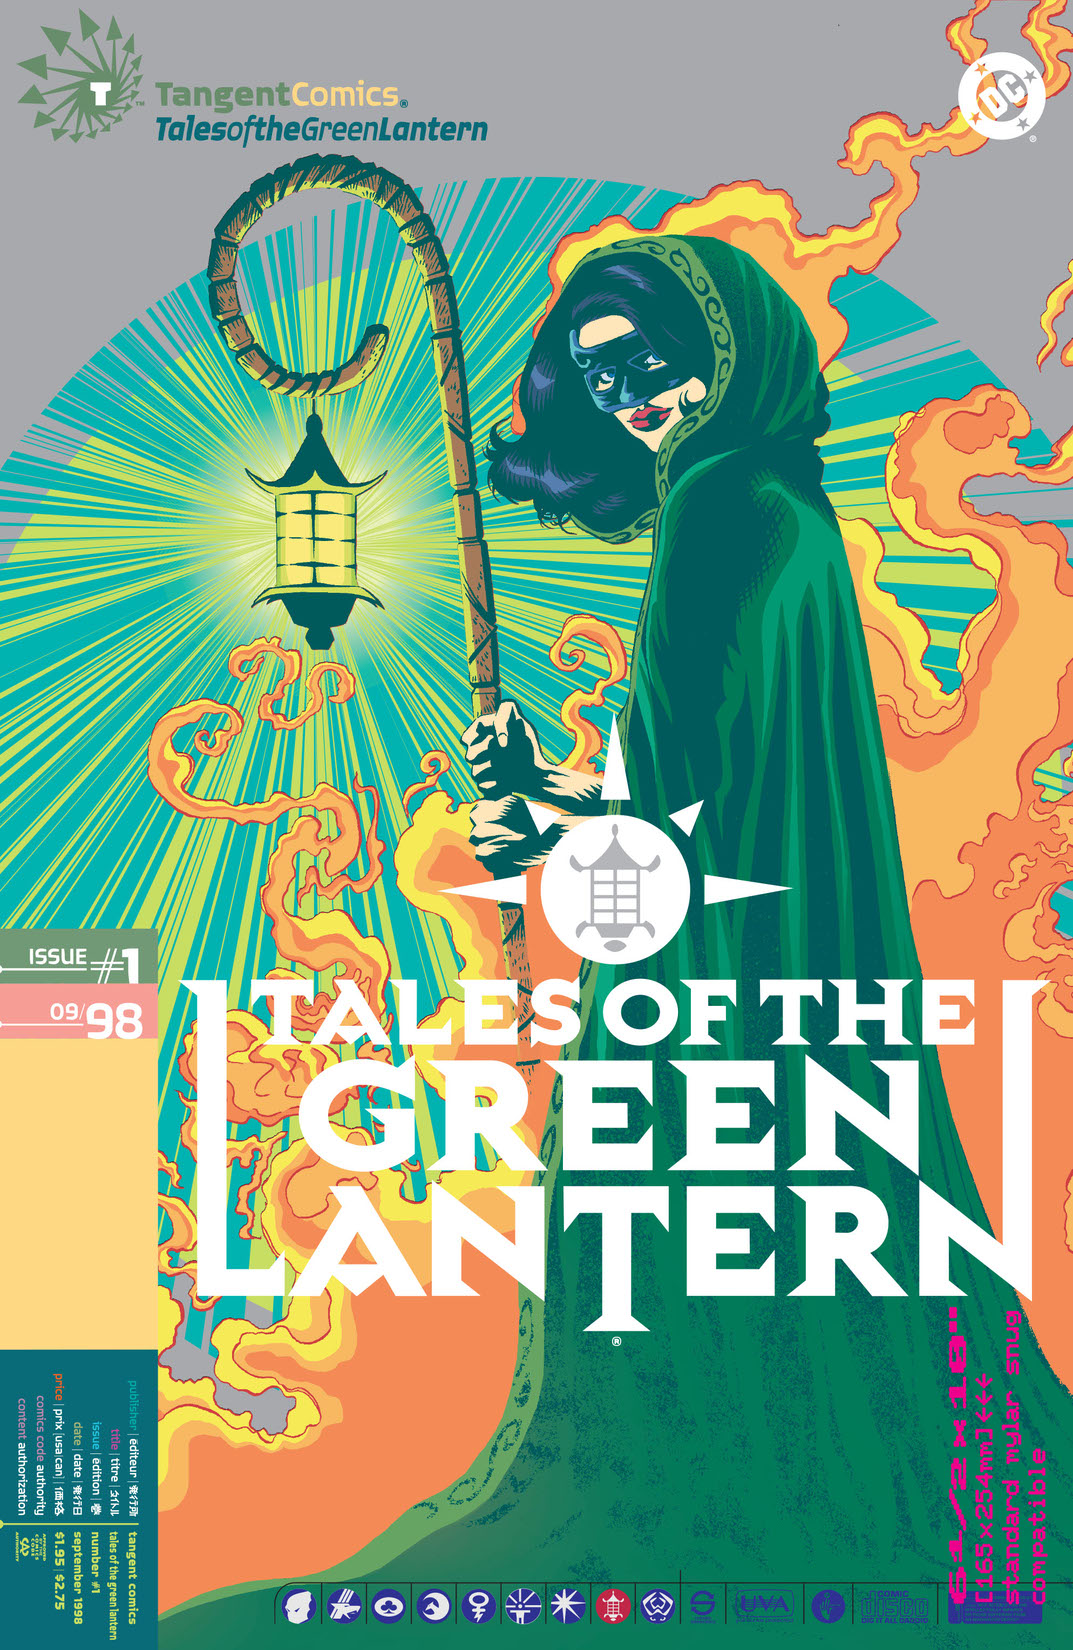 Tales of the Green Lantern #1 preview images